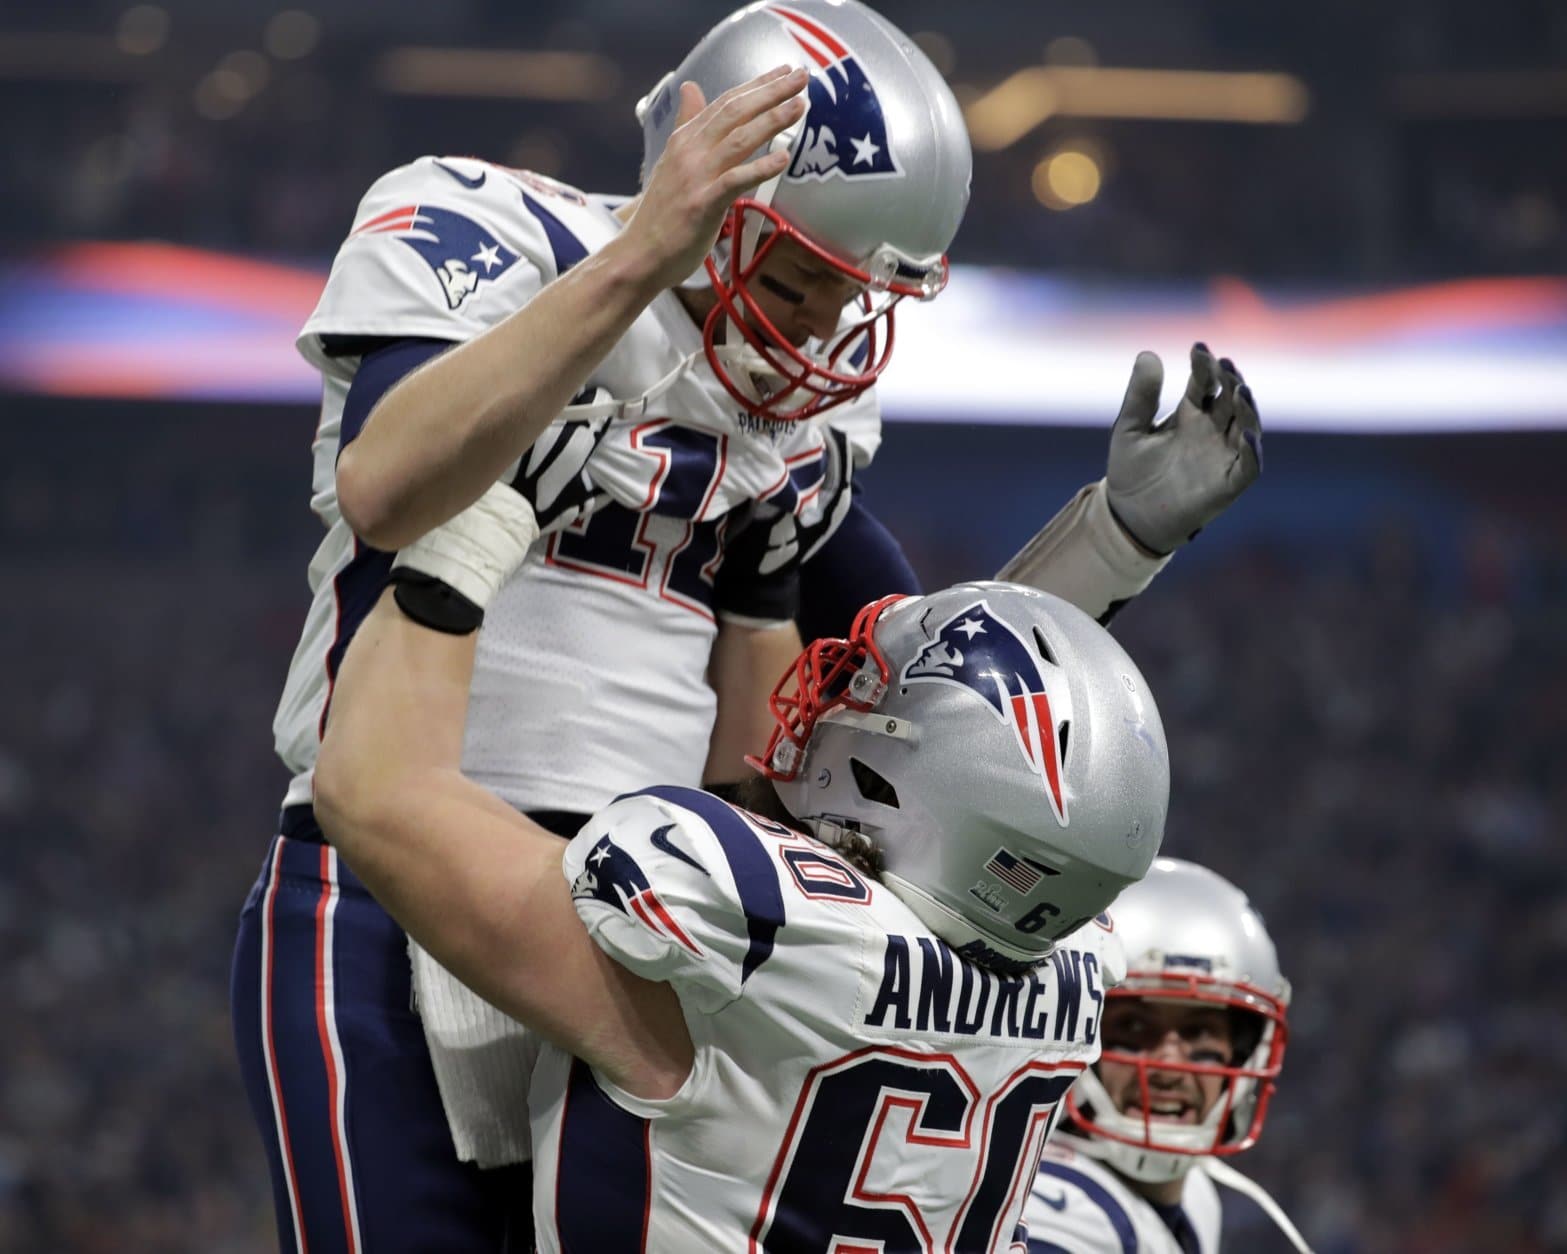 New England Patriots' David Andrews (60) picks up Tom Brady (12) after the Patriots scored a touchdown during the second half of the NFL Super Bowl 53 football game against the Los Angeles Rams Sunday, Feb. 3, 2019, in Atlanta. (AP Photo/Jeff Roberson)